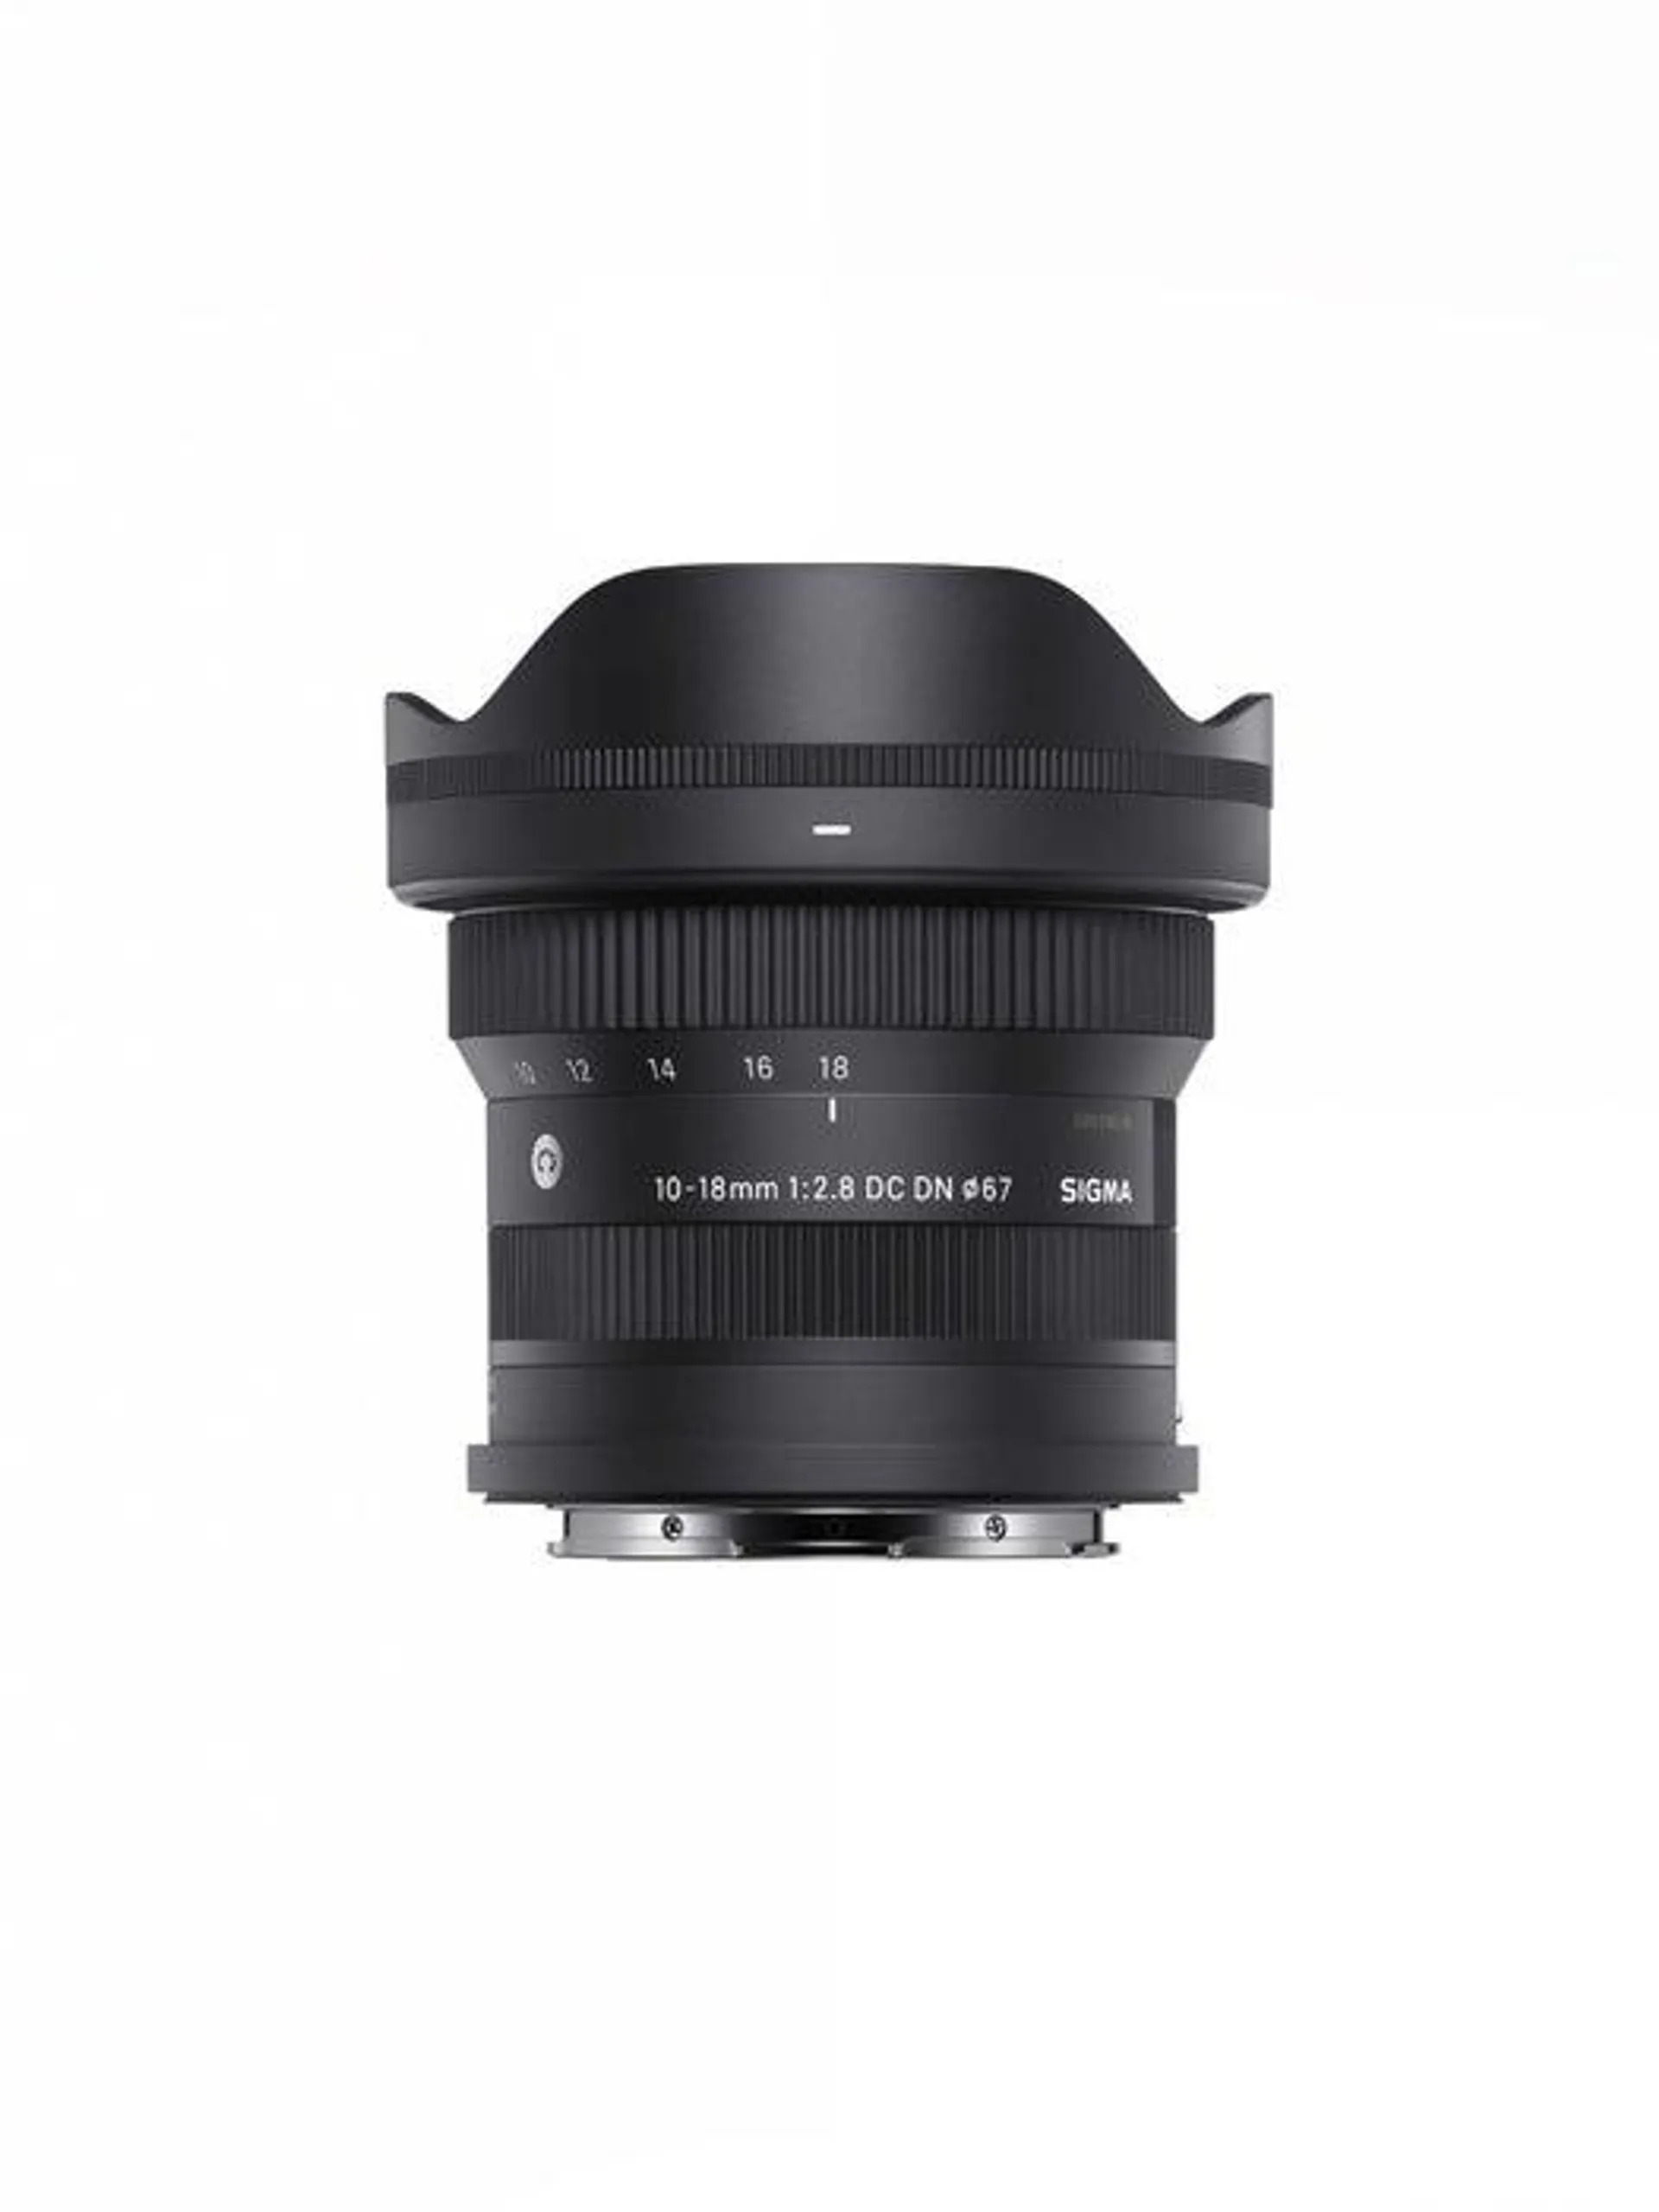 Sigma 10-18mm f/2.8 DC DN Contemporary for L-mount